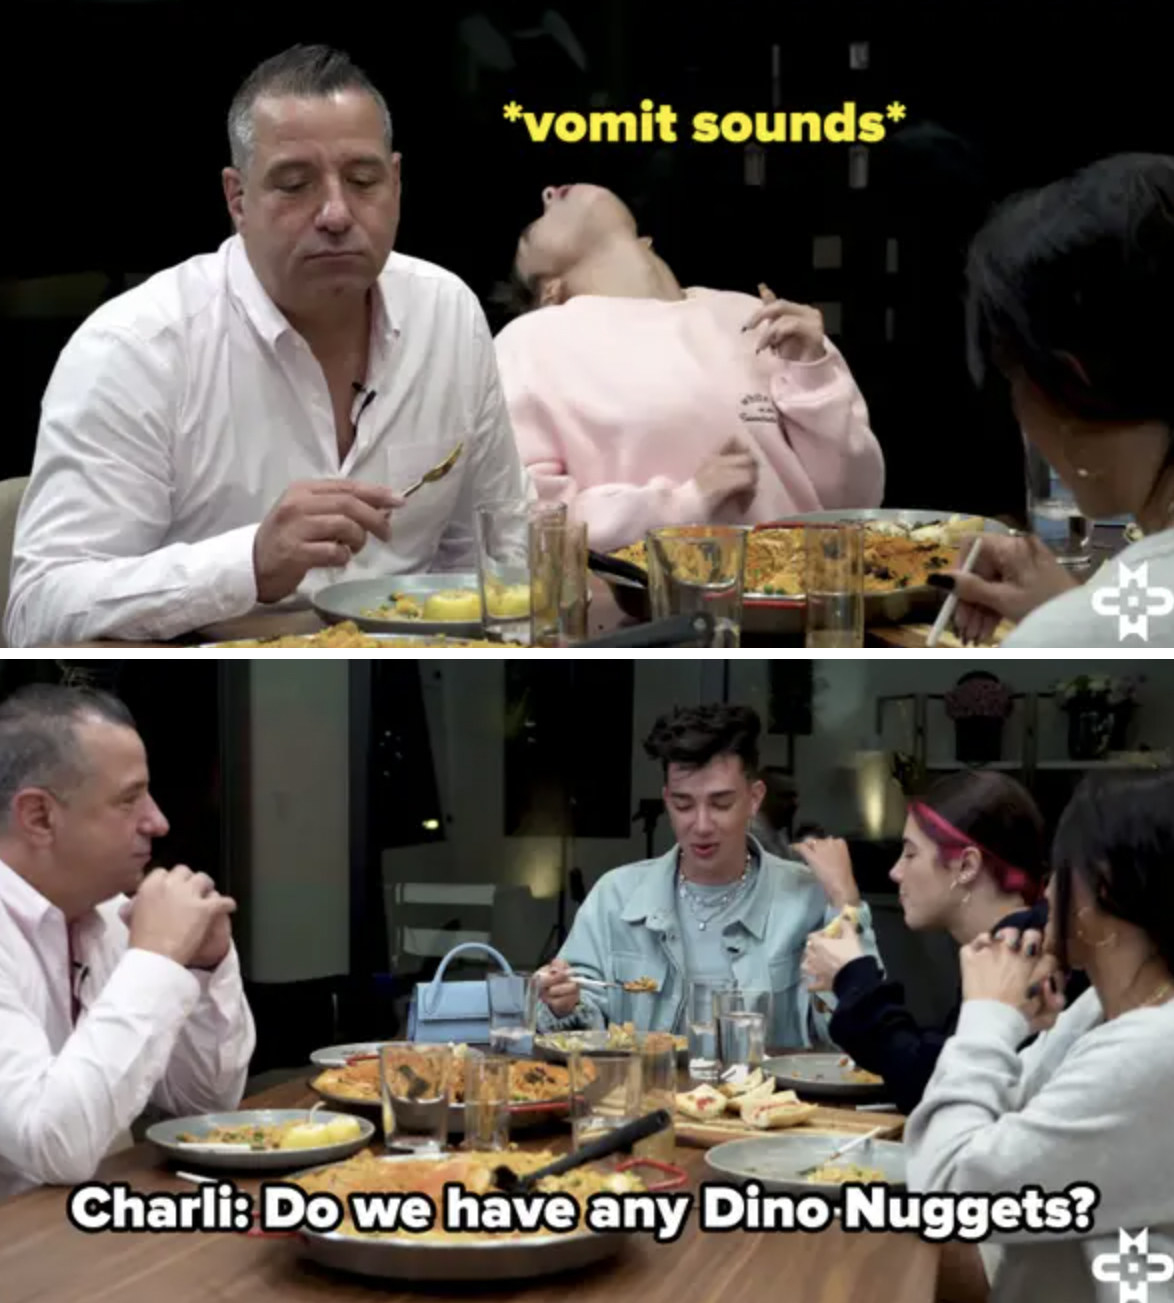 The D&#x27;Amelios sitting around a dinner table with James Charles, Dixie is throwing her head back making vomit noises, and a caption reads &quot;Charli: Do we have any Dino Nuggets?&quot;